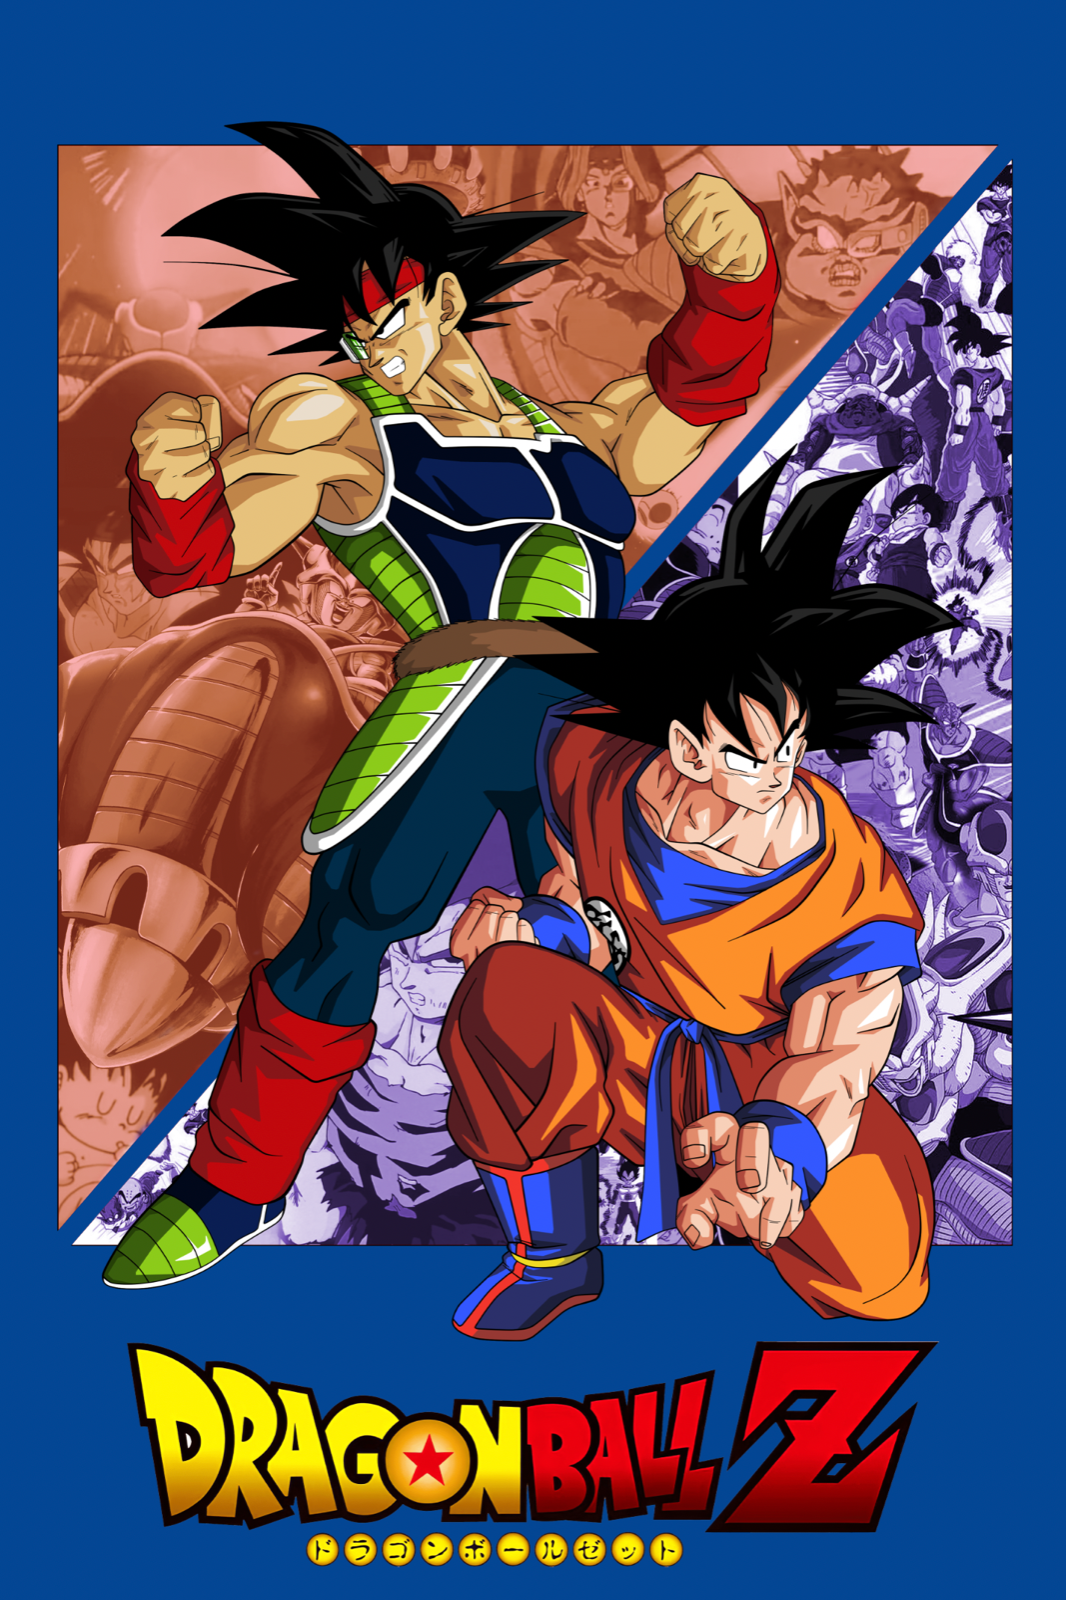 Dragon Ball Poster Gogeta Blue vs Full power Broly 12in x18in Free Shipping